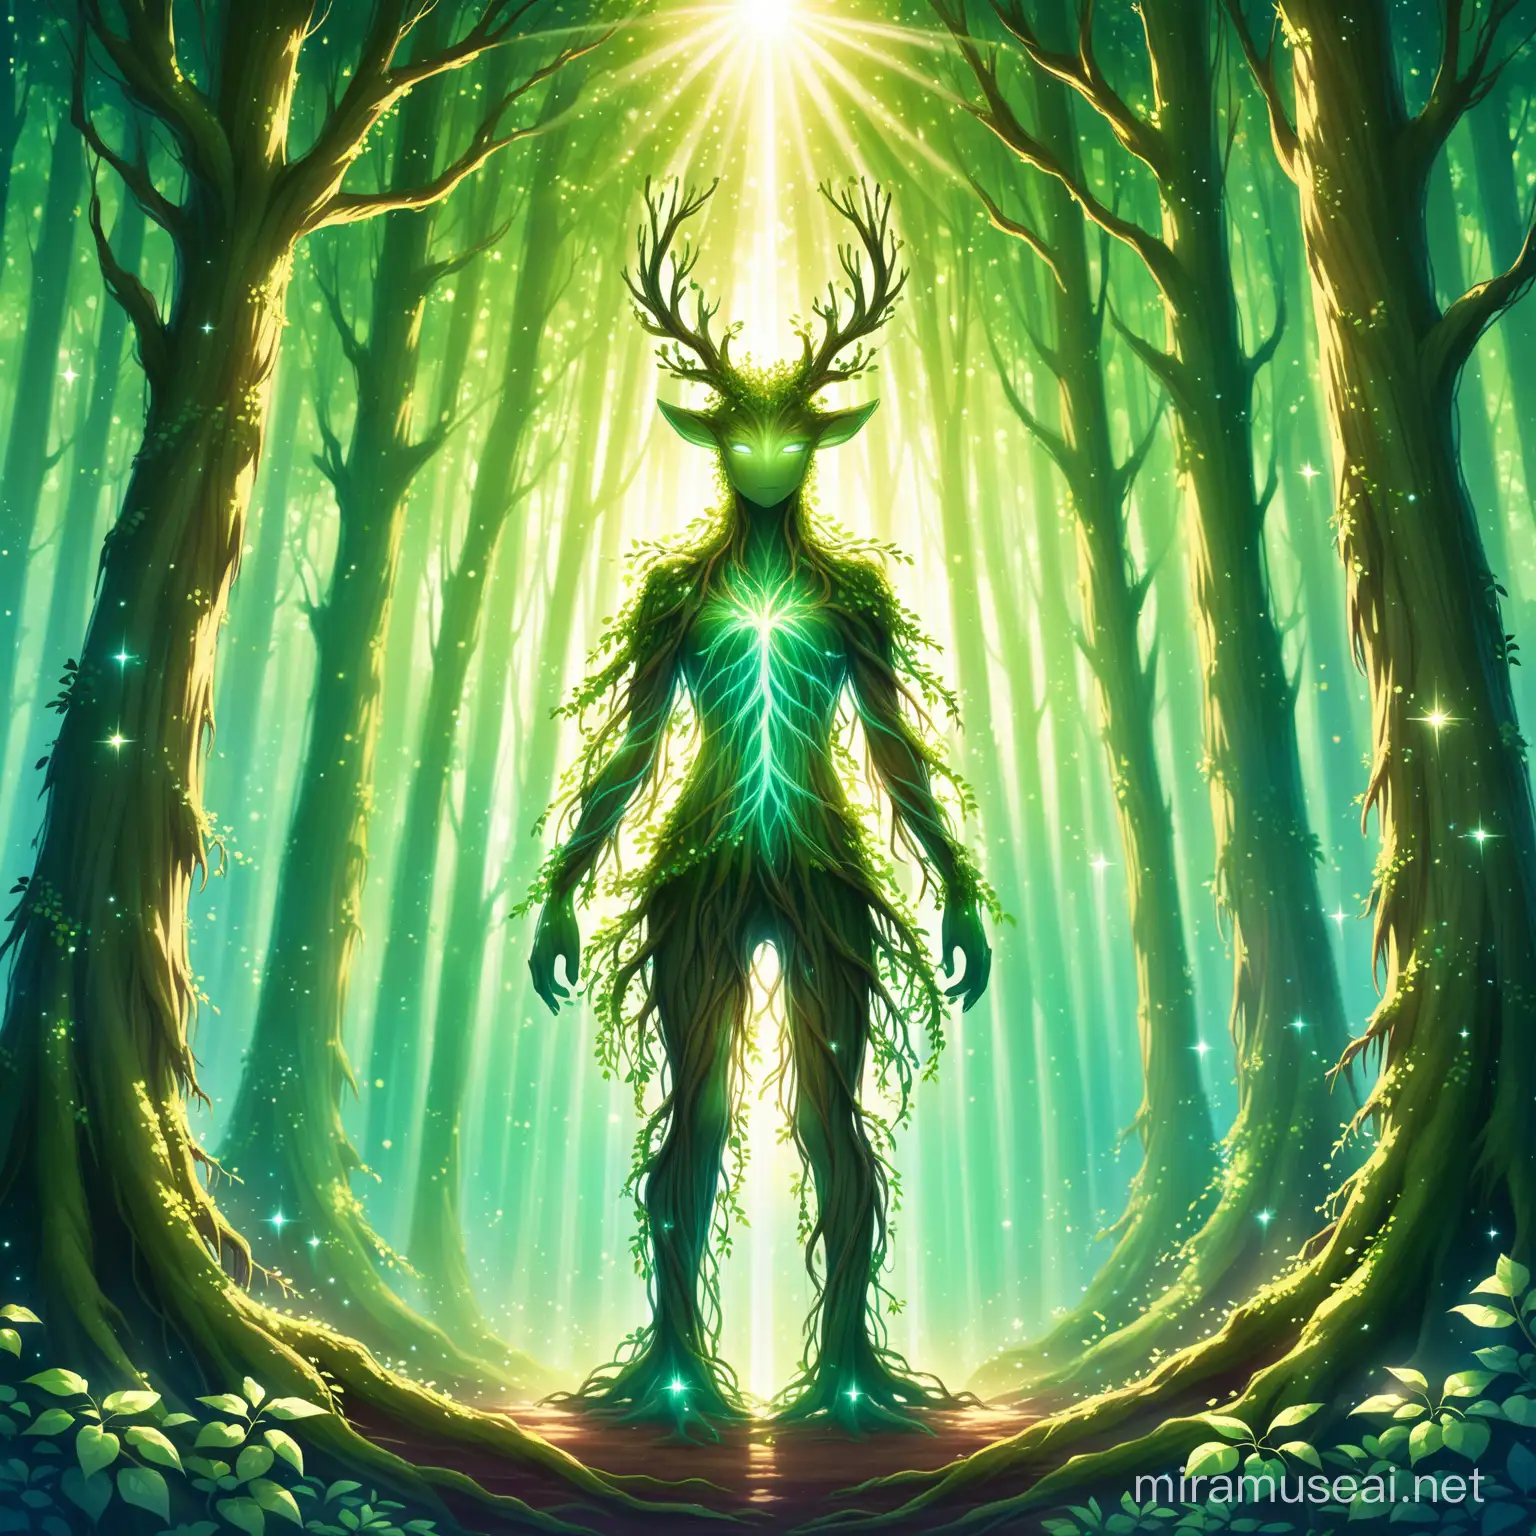 Enchanting Forest Spirit with Root Limbs and Magical Aura